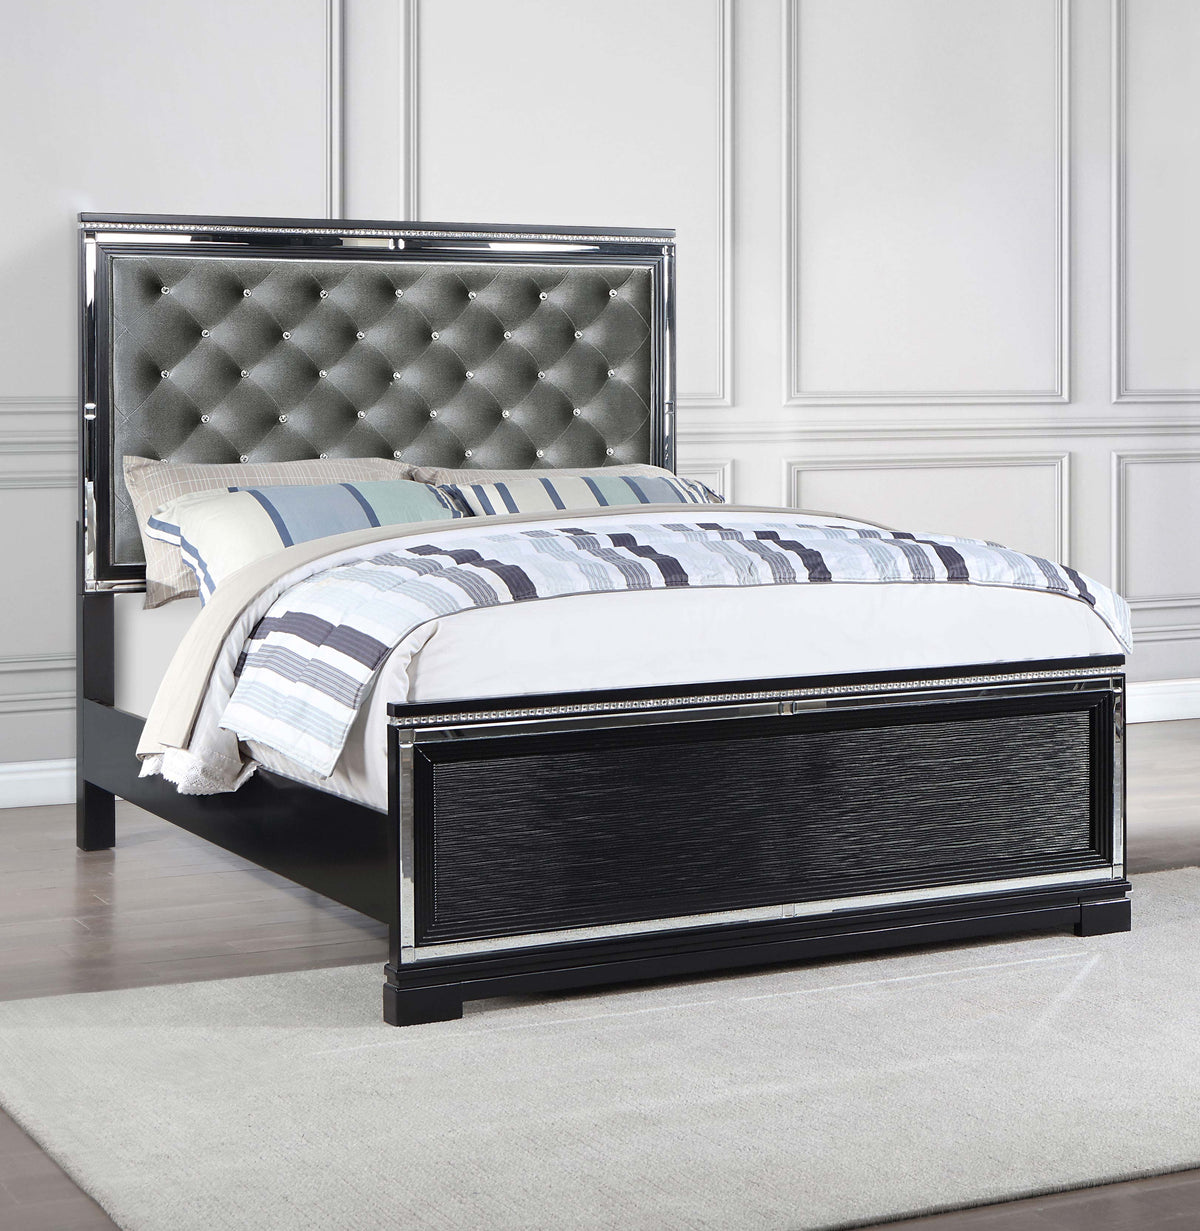 Cappola Upholstered Tufted Bed Silver and Black Cappola Upholstered Tufted Bed Silver and Black Half Price Furniture